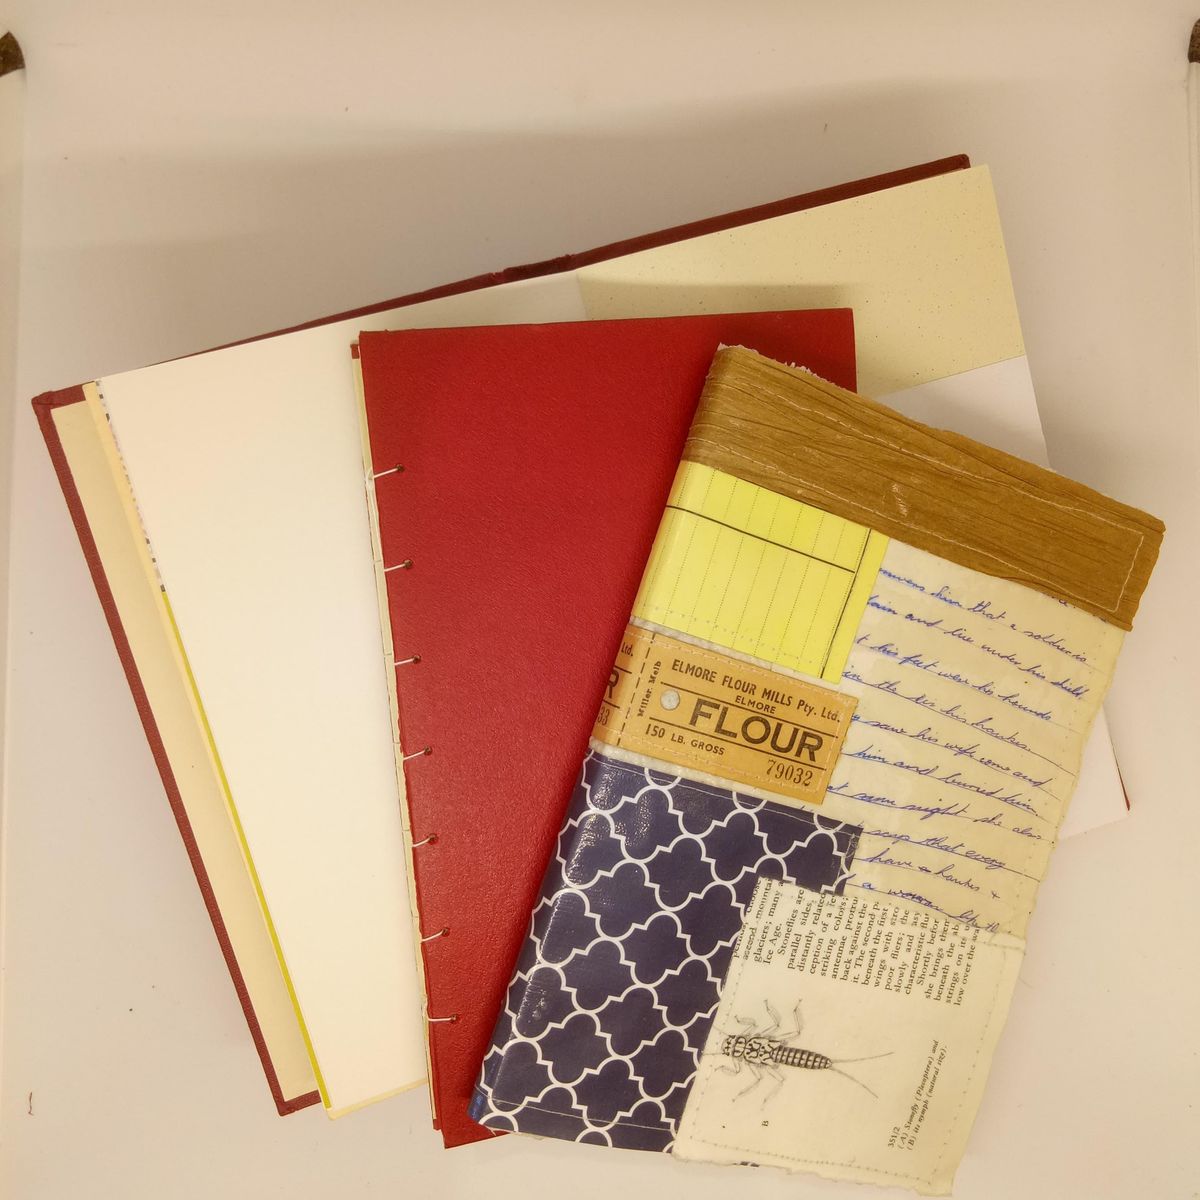 Make book covers : #3 in A Summer Season of Book Making